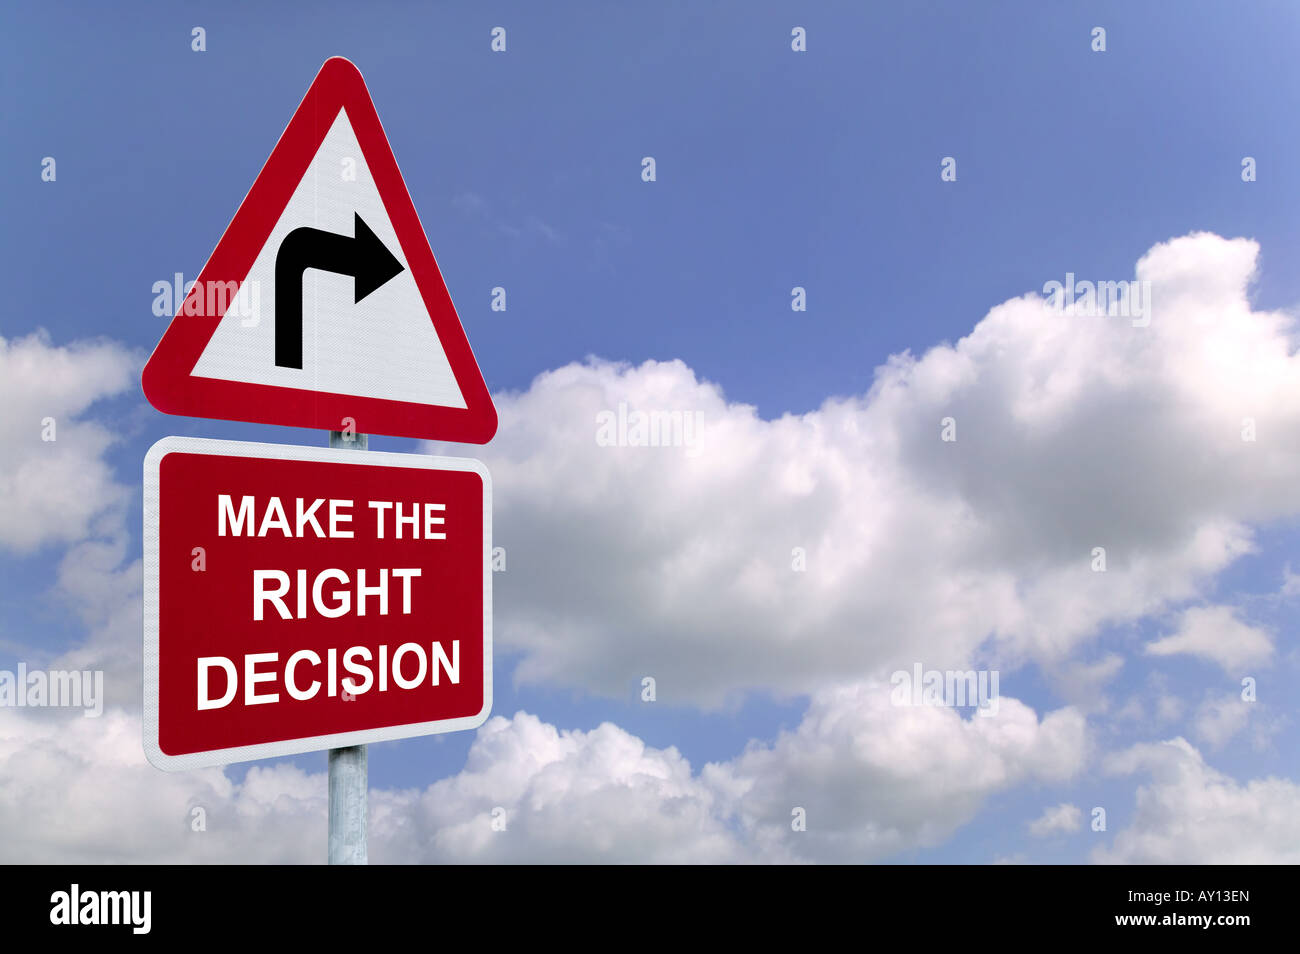 Make the Right Decision on a signpost against a blue cloudy sky Stock Photo